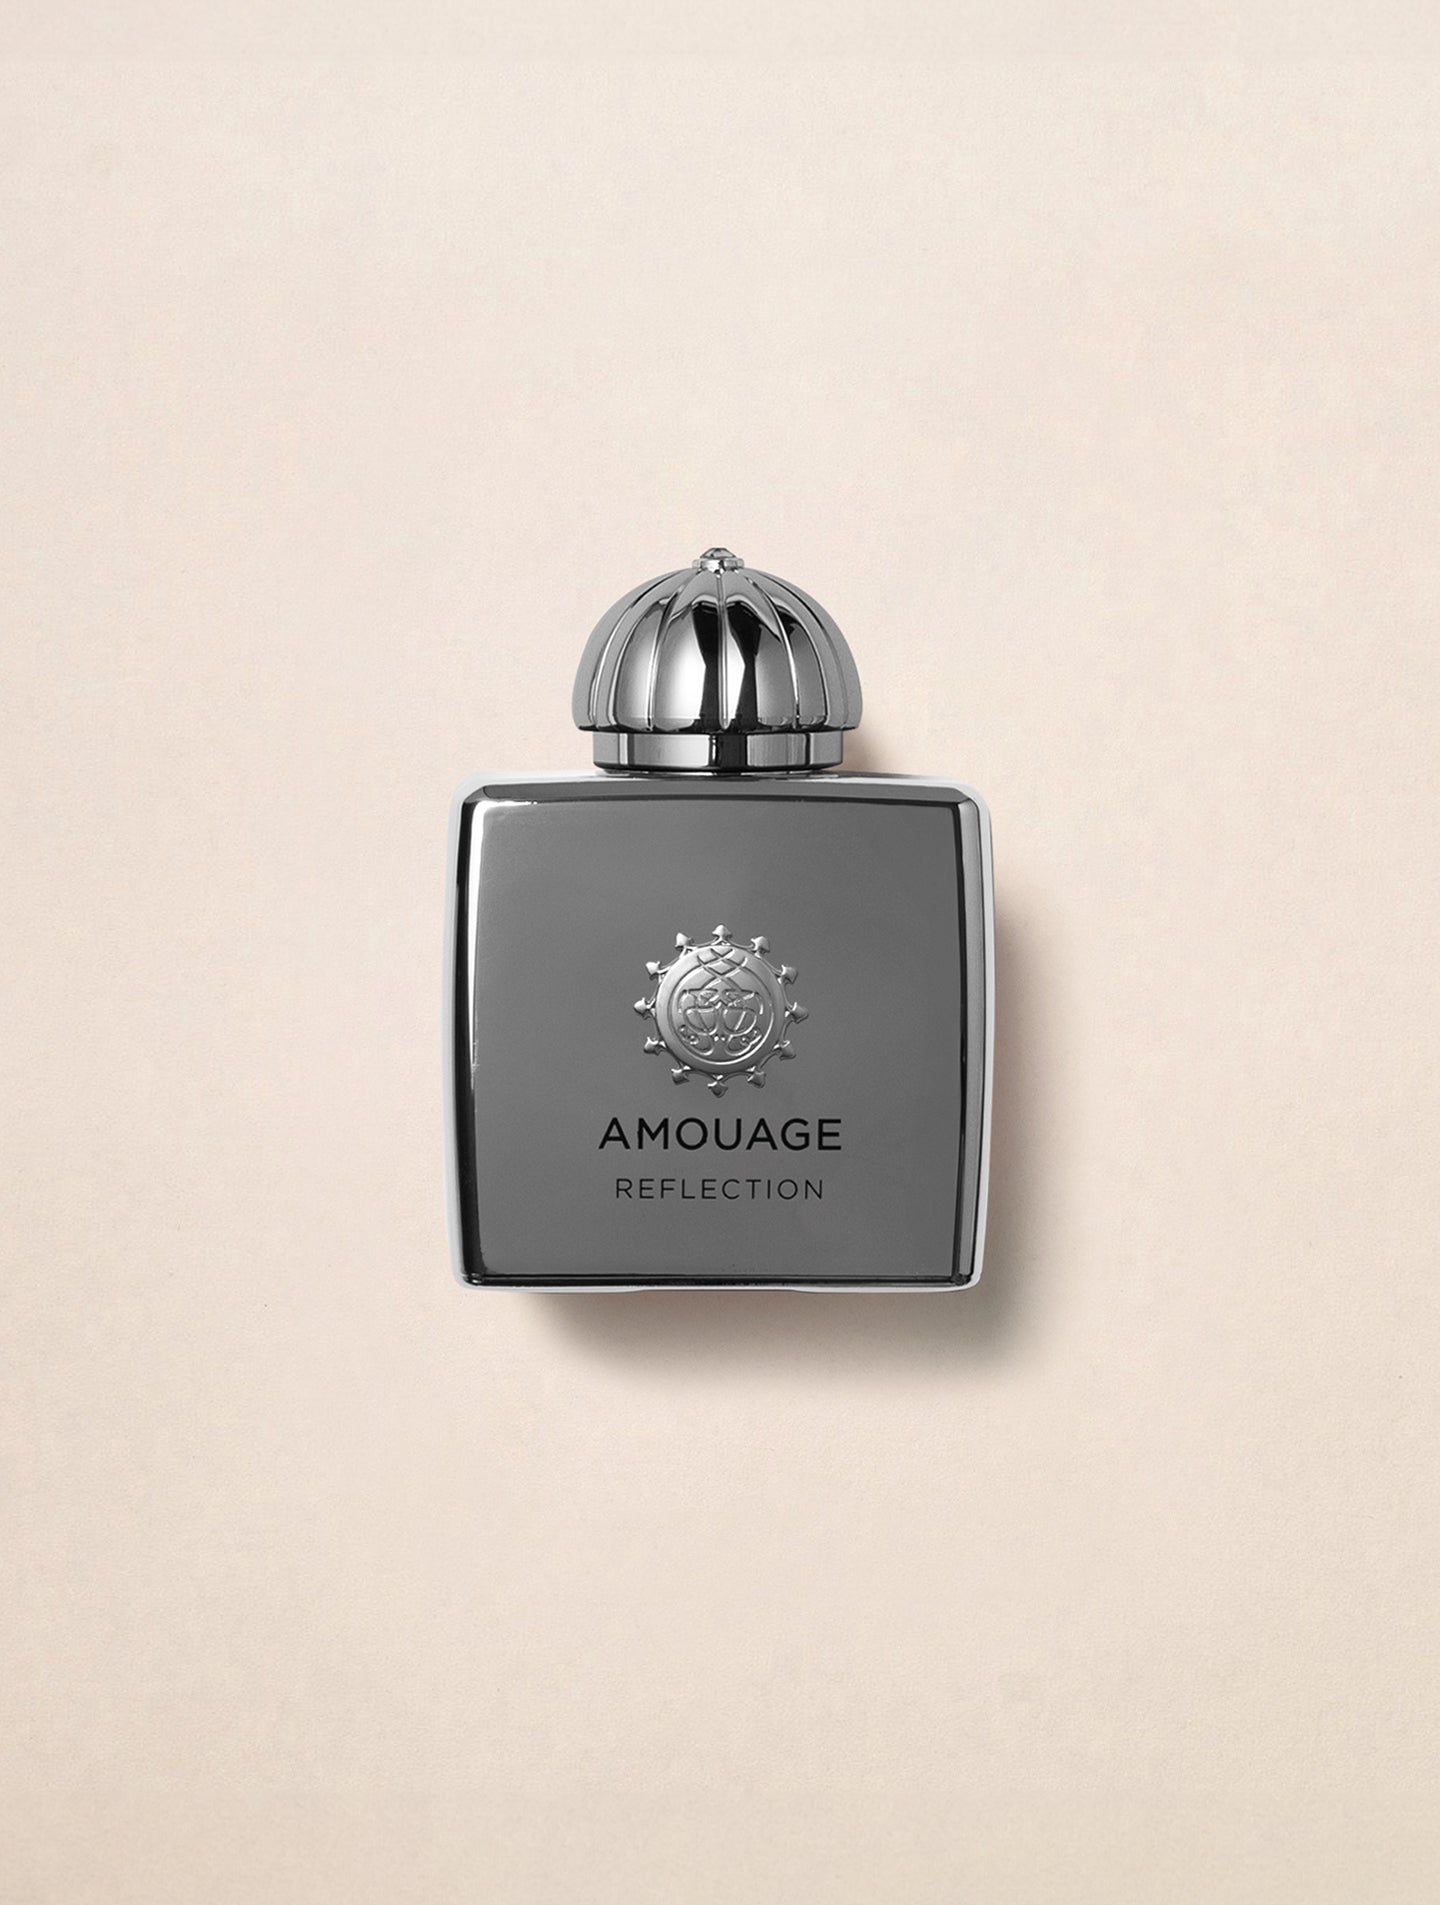 THE MAIN COLLECTION – The House of Amouage